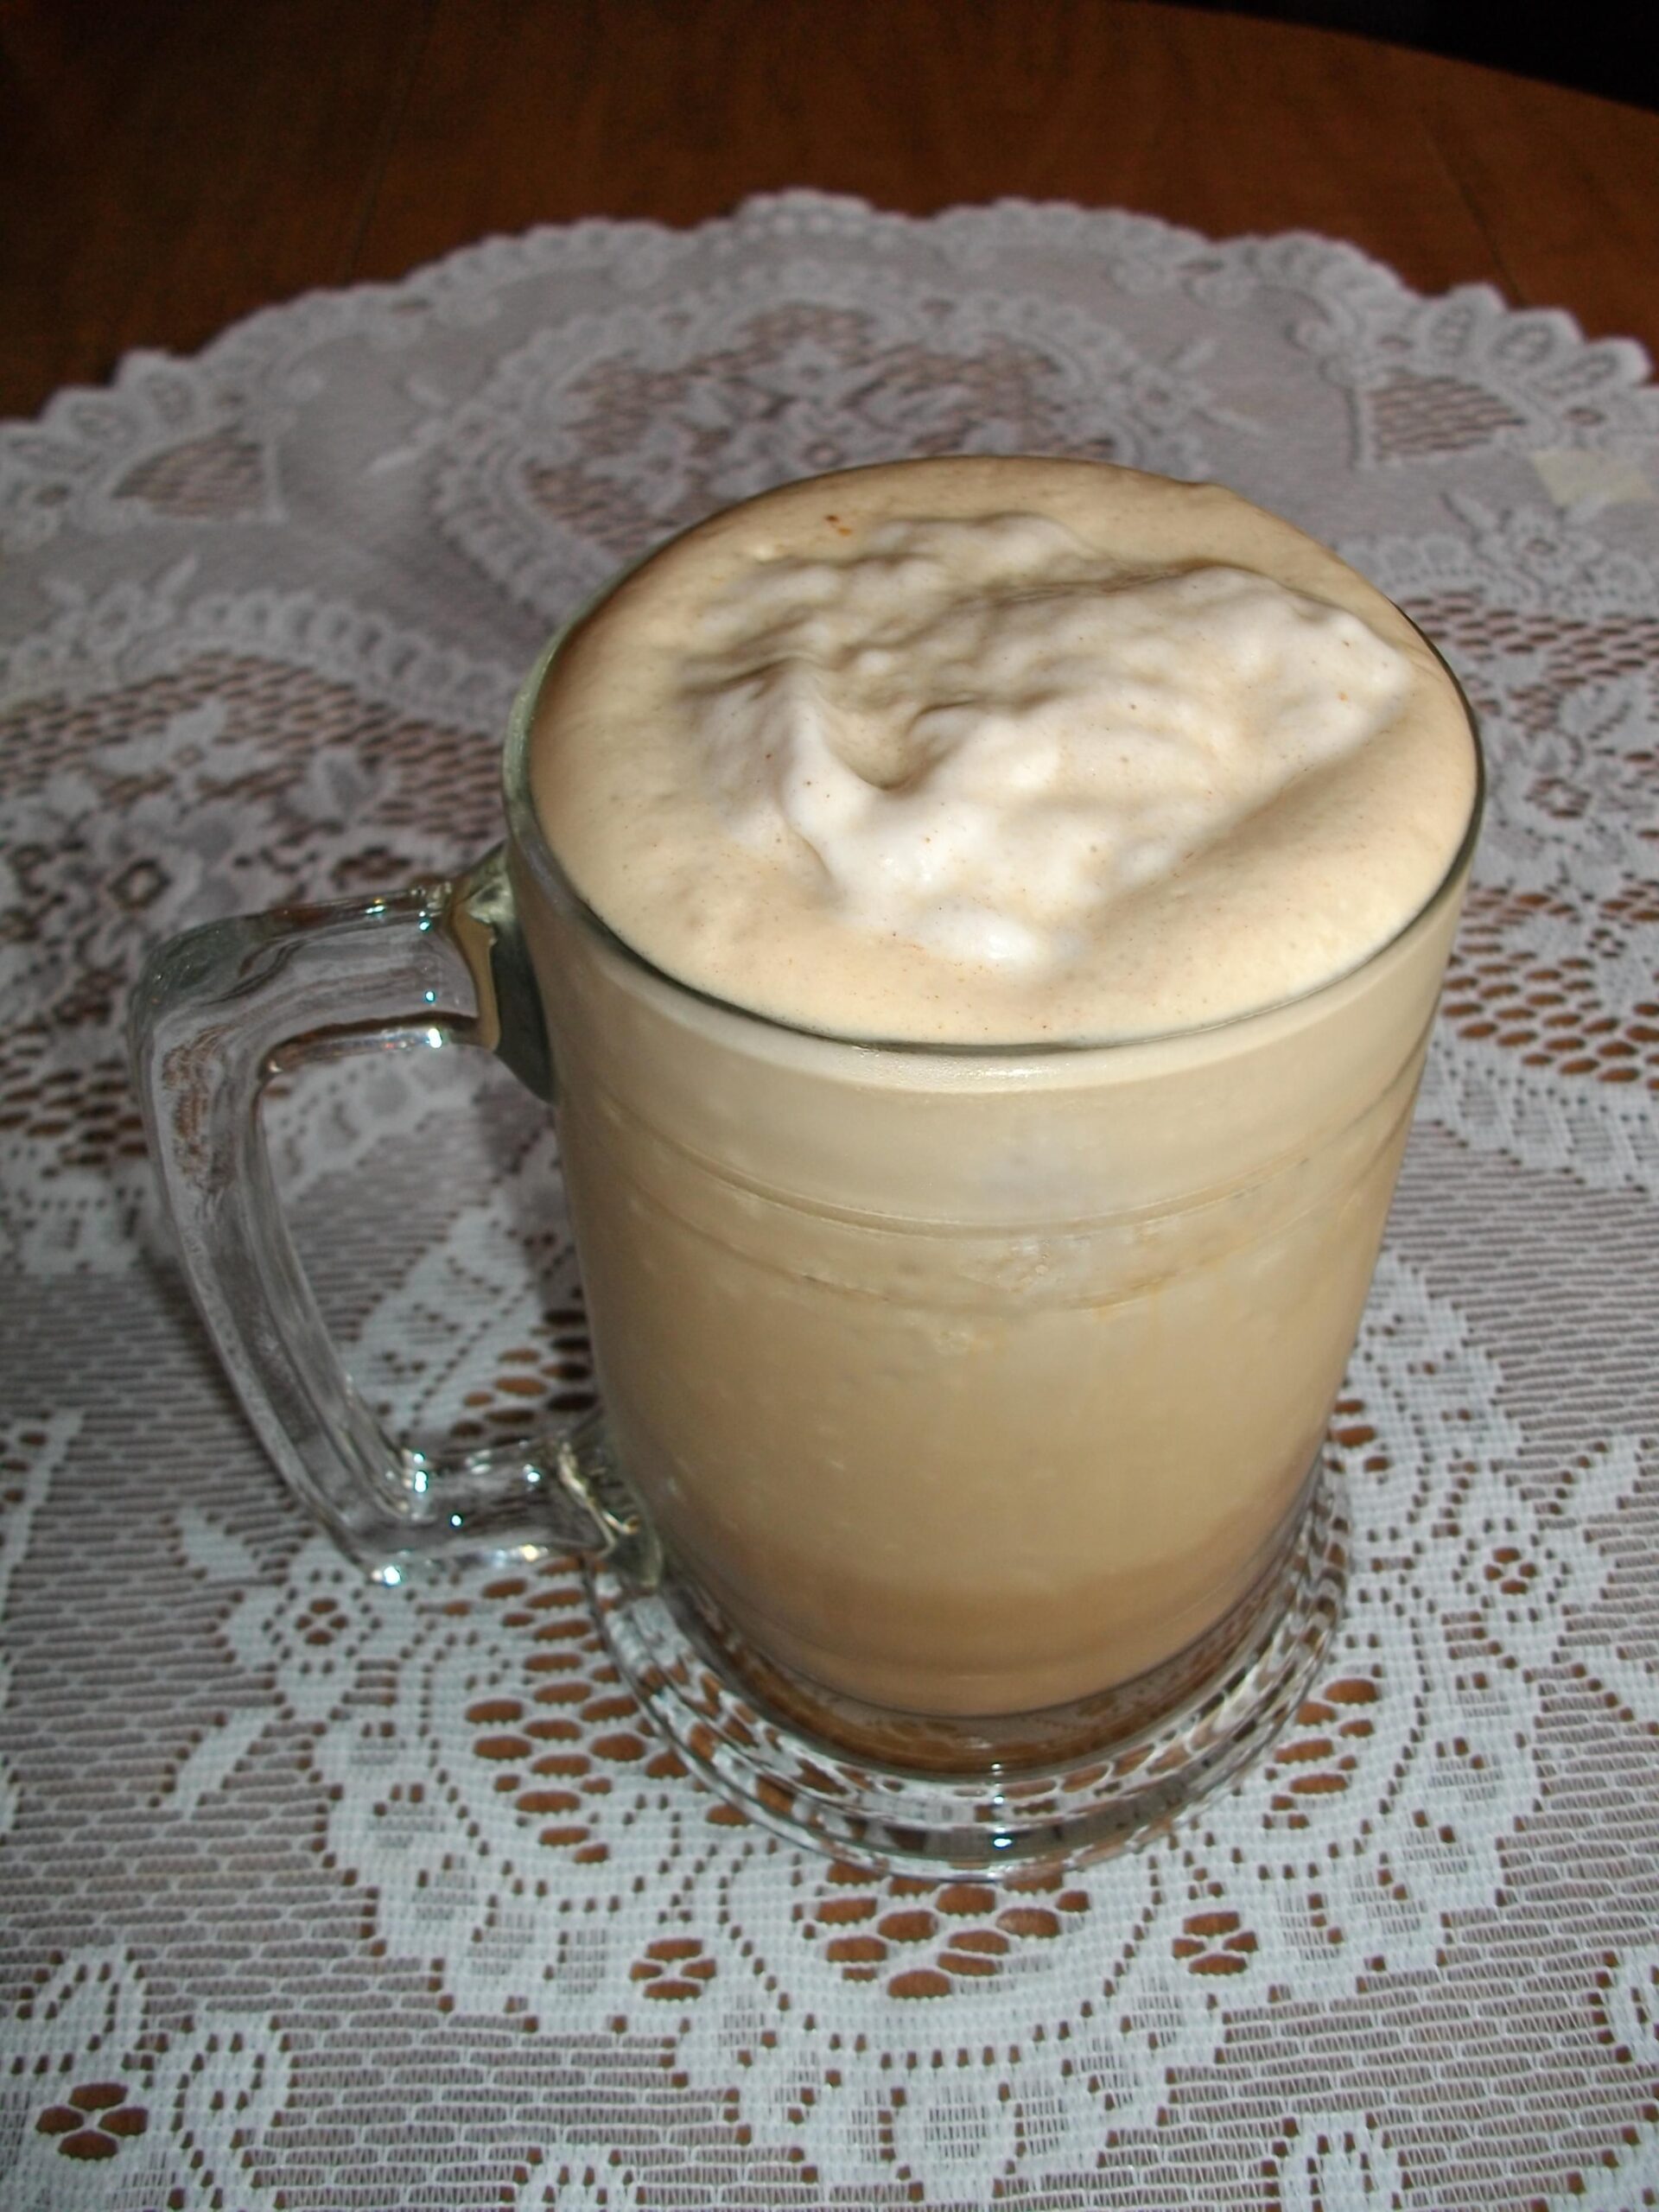  Indulge in the creamy goodness of a homemade cappuccino.